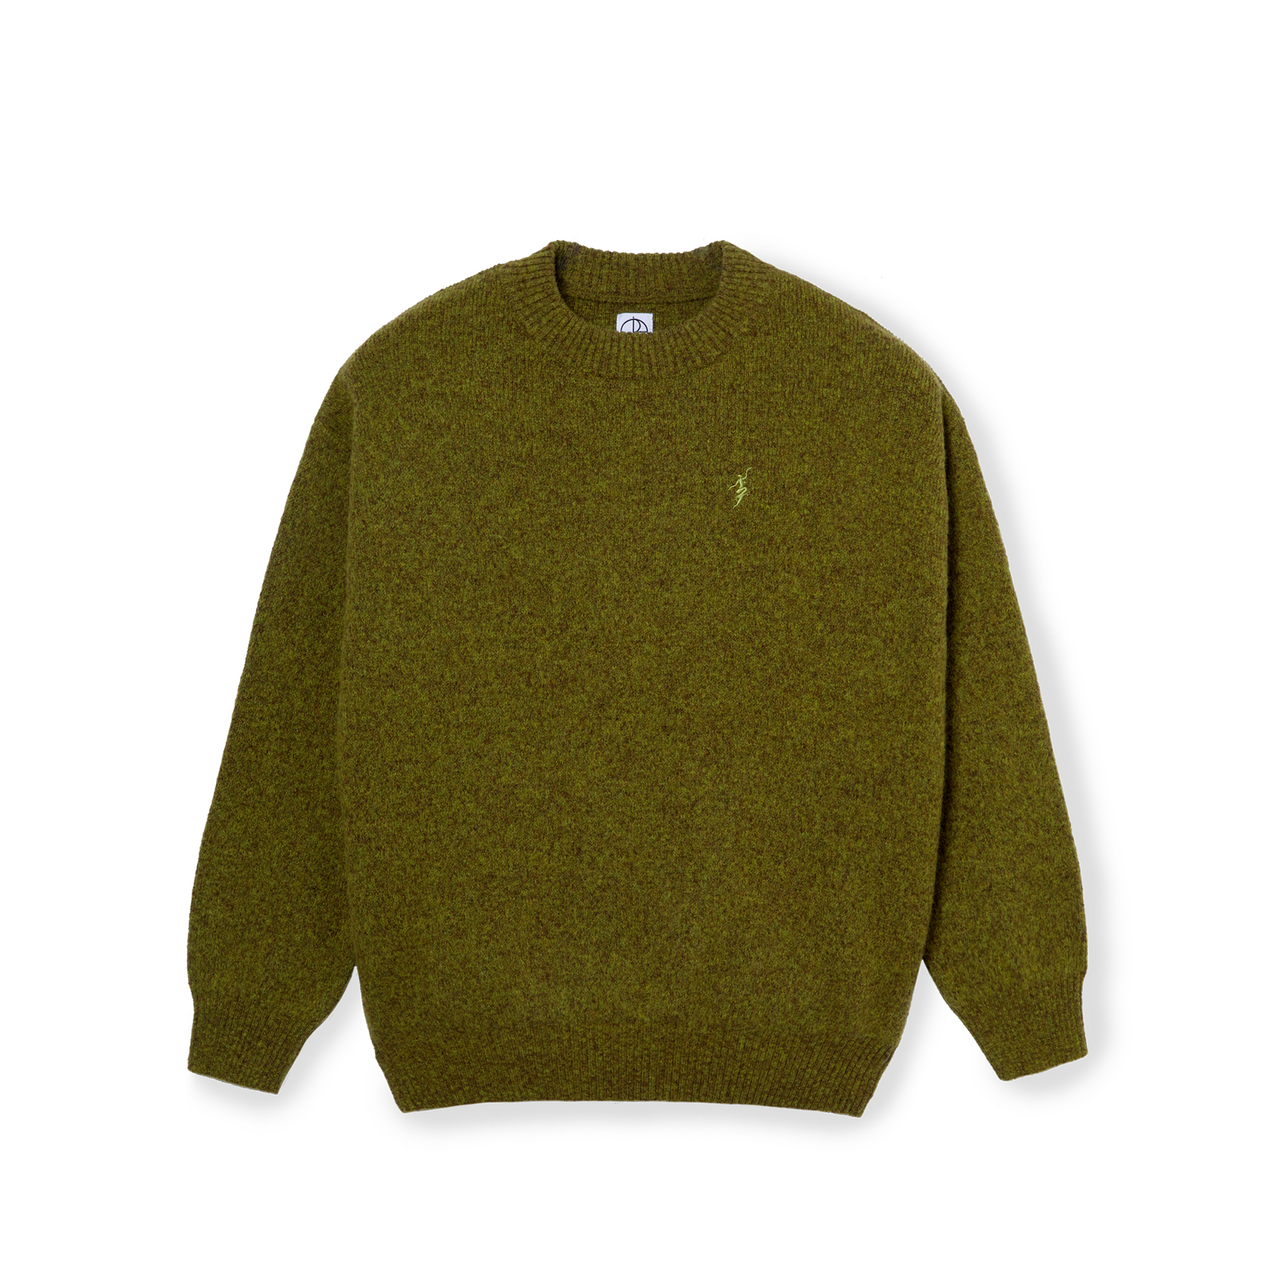 No Comply Knit Sweater - Army Green